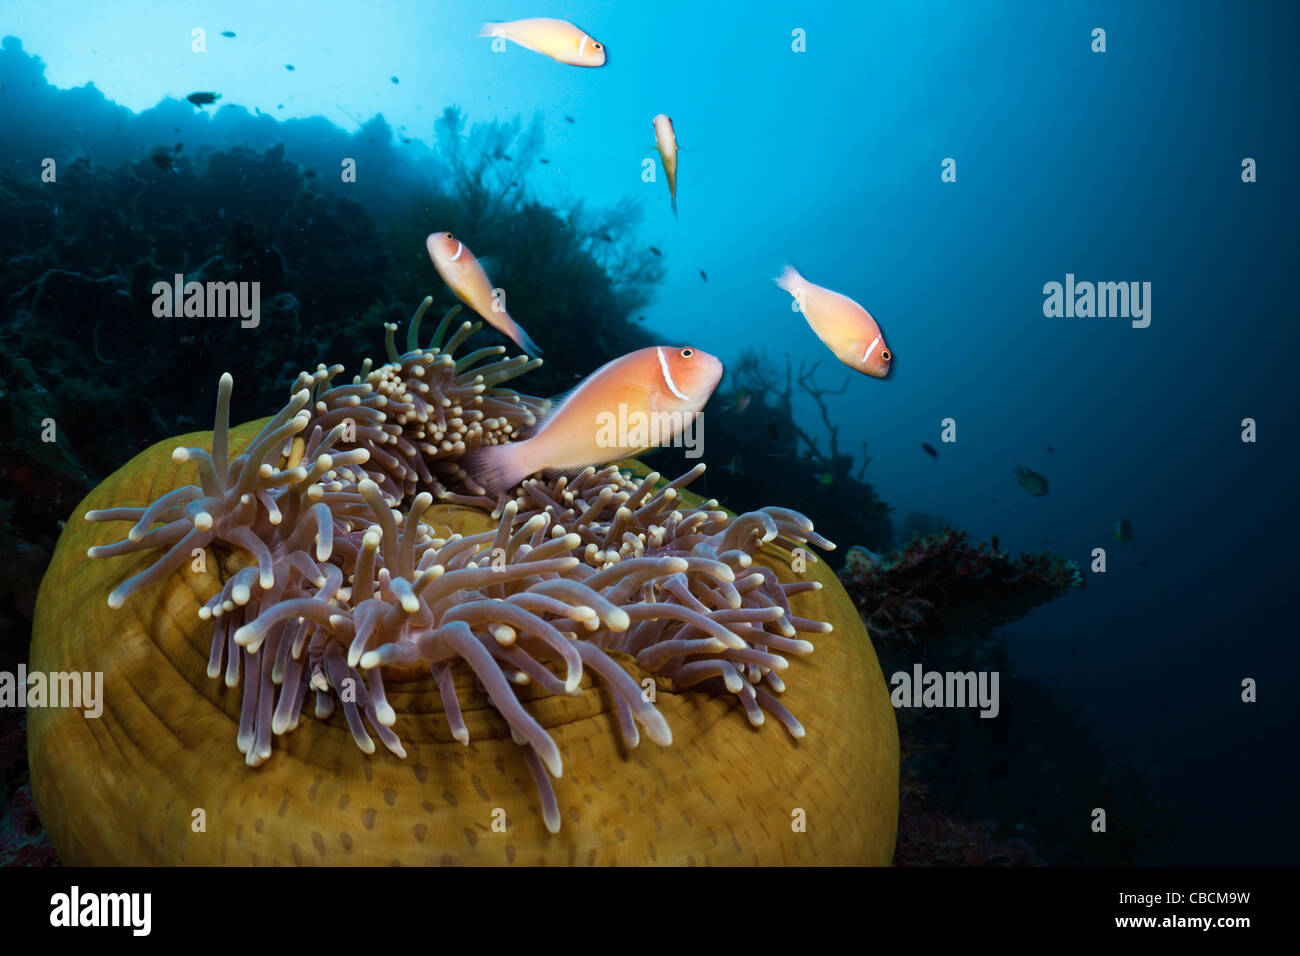 Pink Anemonefish nel magnifico mare Anemone, Amphiprion perideraion, Heteractis magnifica, Cenderawasih Bay, Indonesia Foto Stock